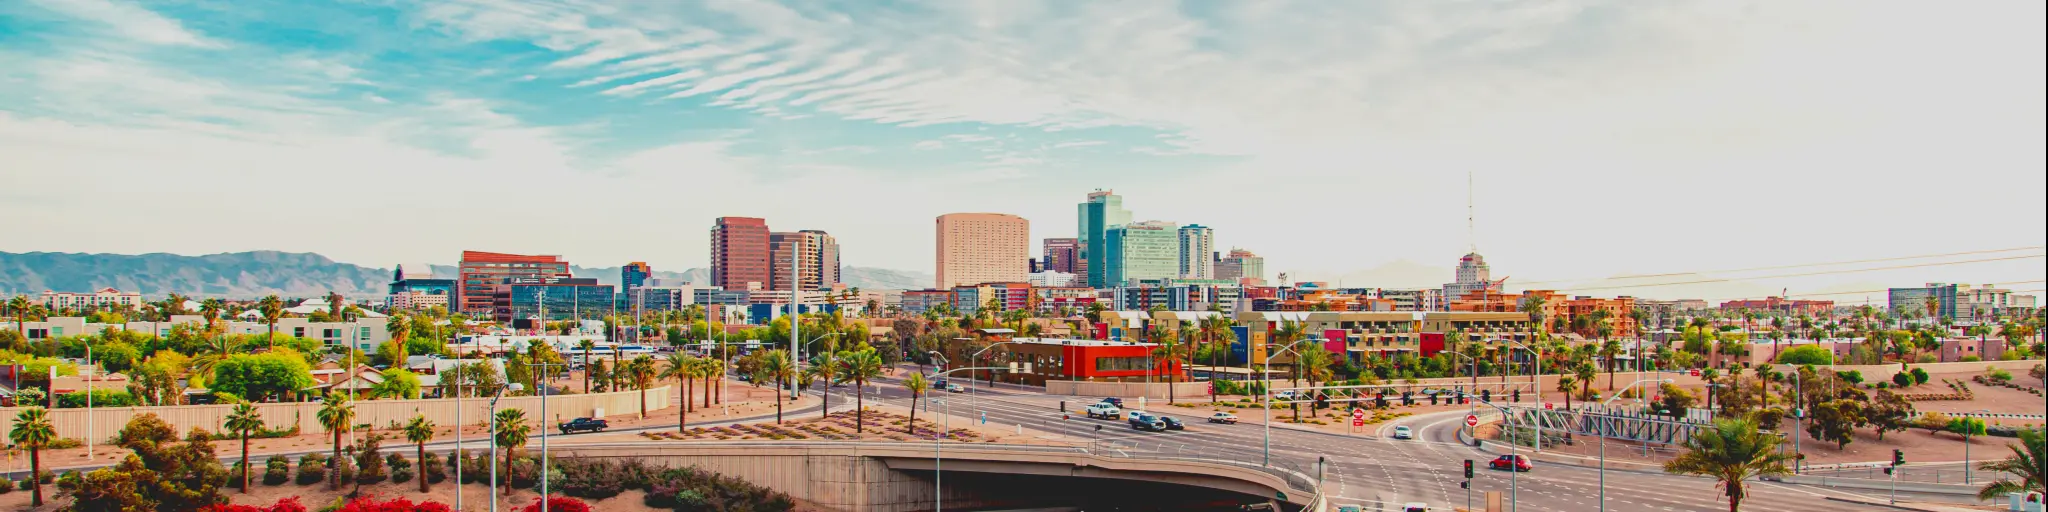 A scenic view of the cars driving along the intersecting highway with palm trees and bushes planted along the road with a picture of the skyscrapers of Phoenix in a fine day with a thin sheet of clouds covering the blue sky